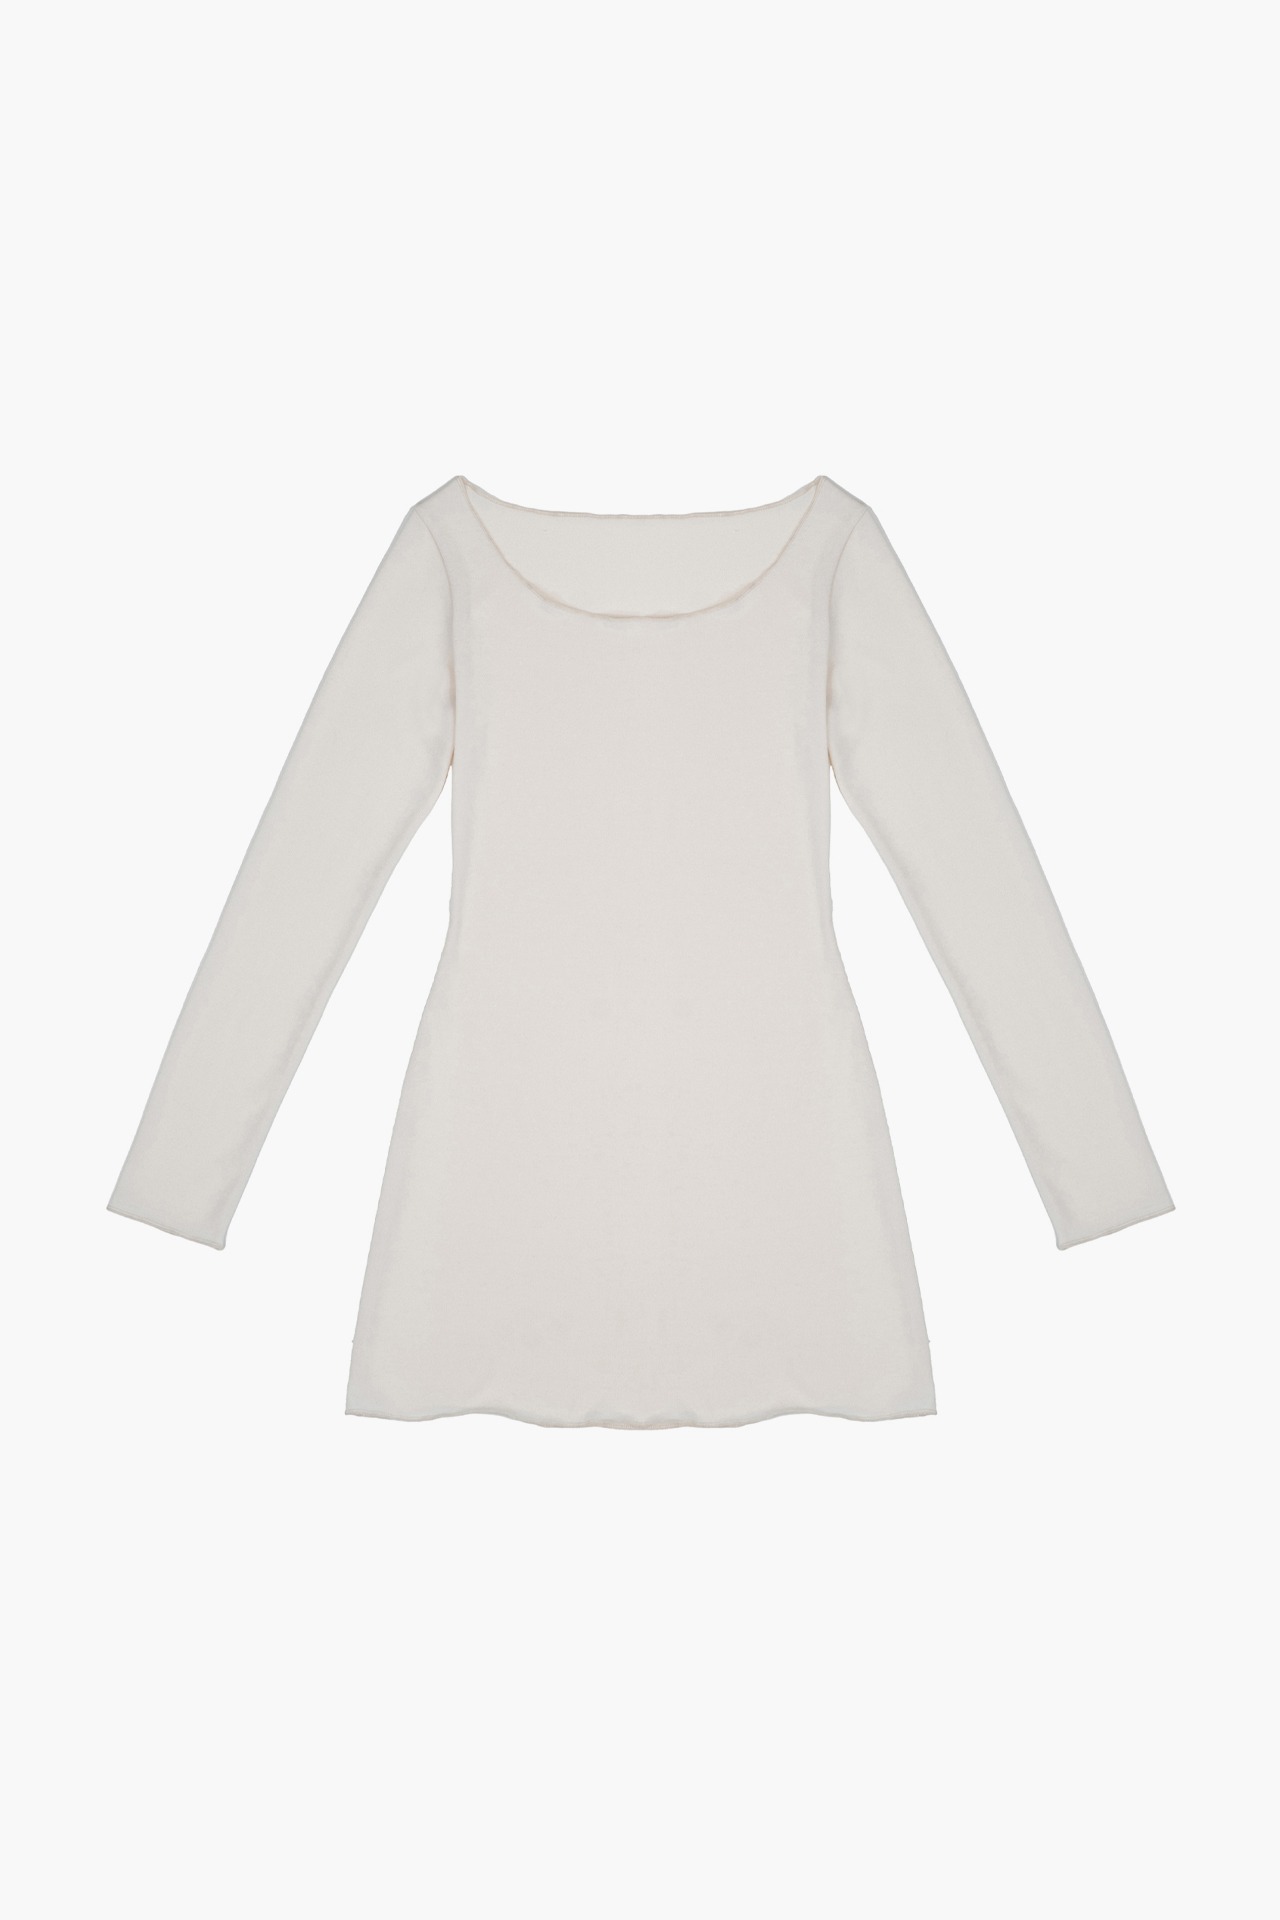 KNIT LONG SLEEVE TOP IVORY